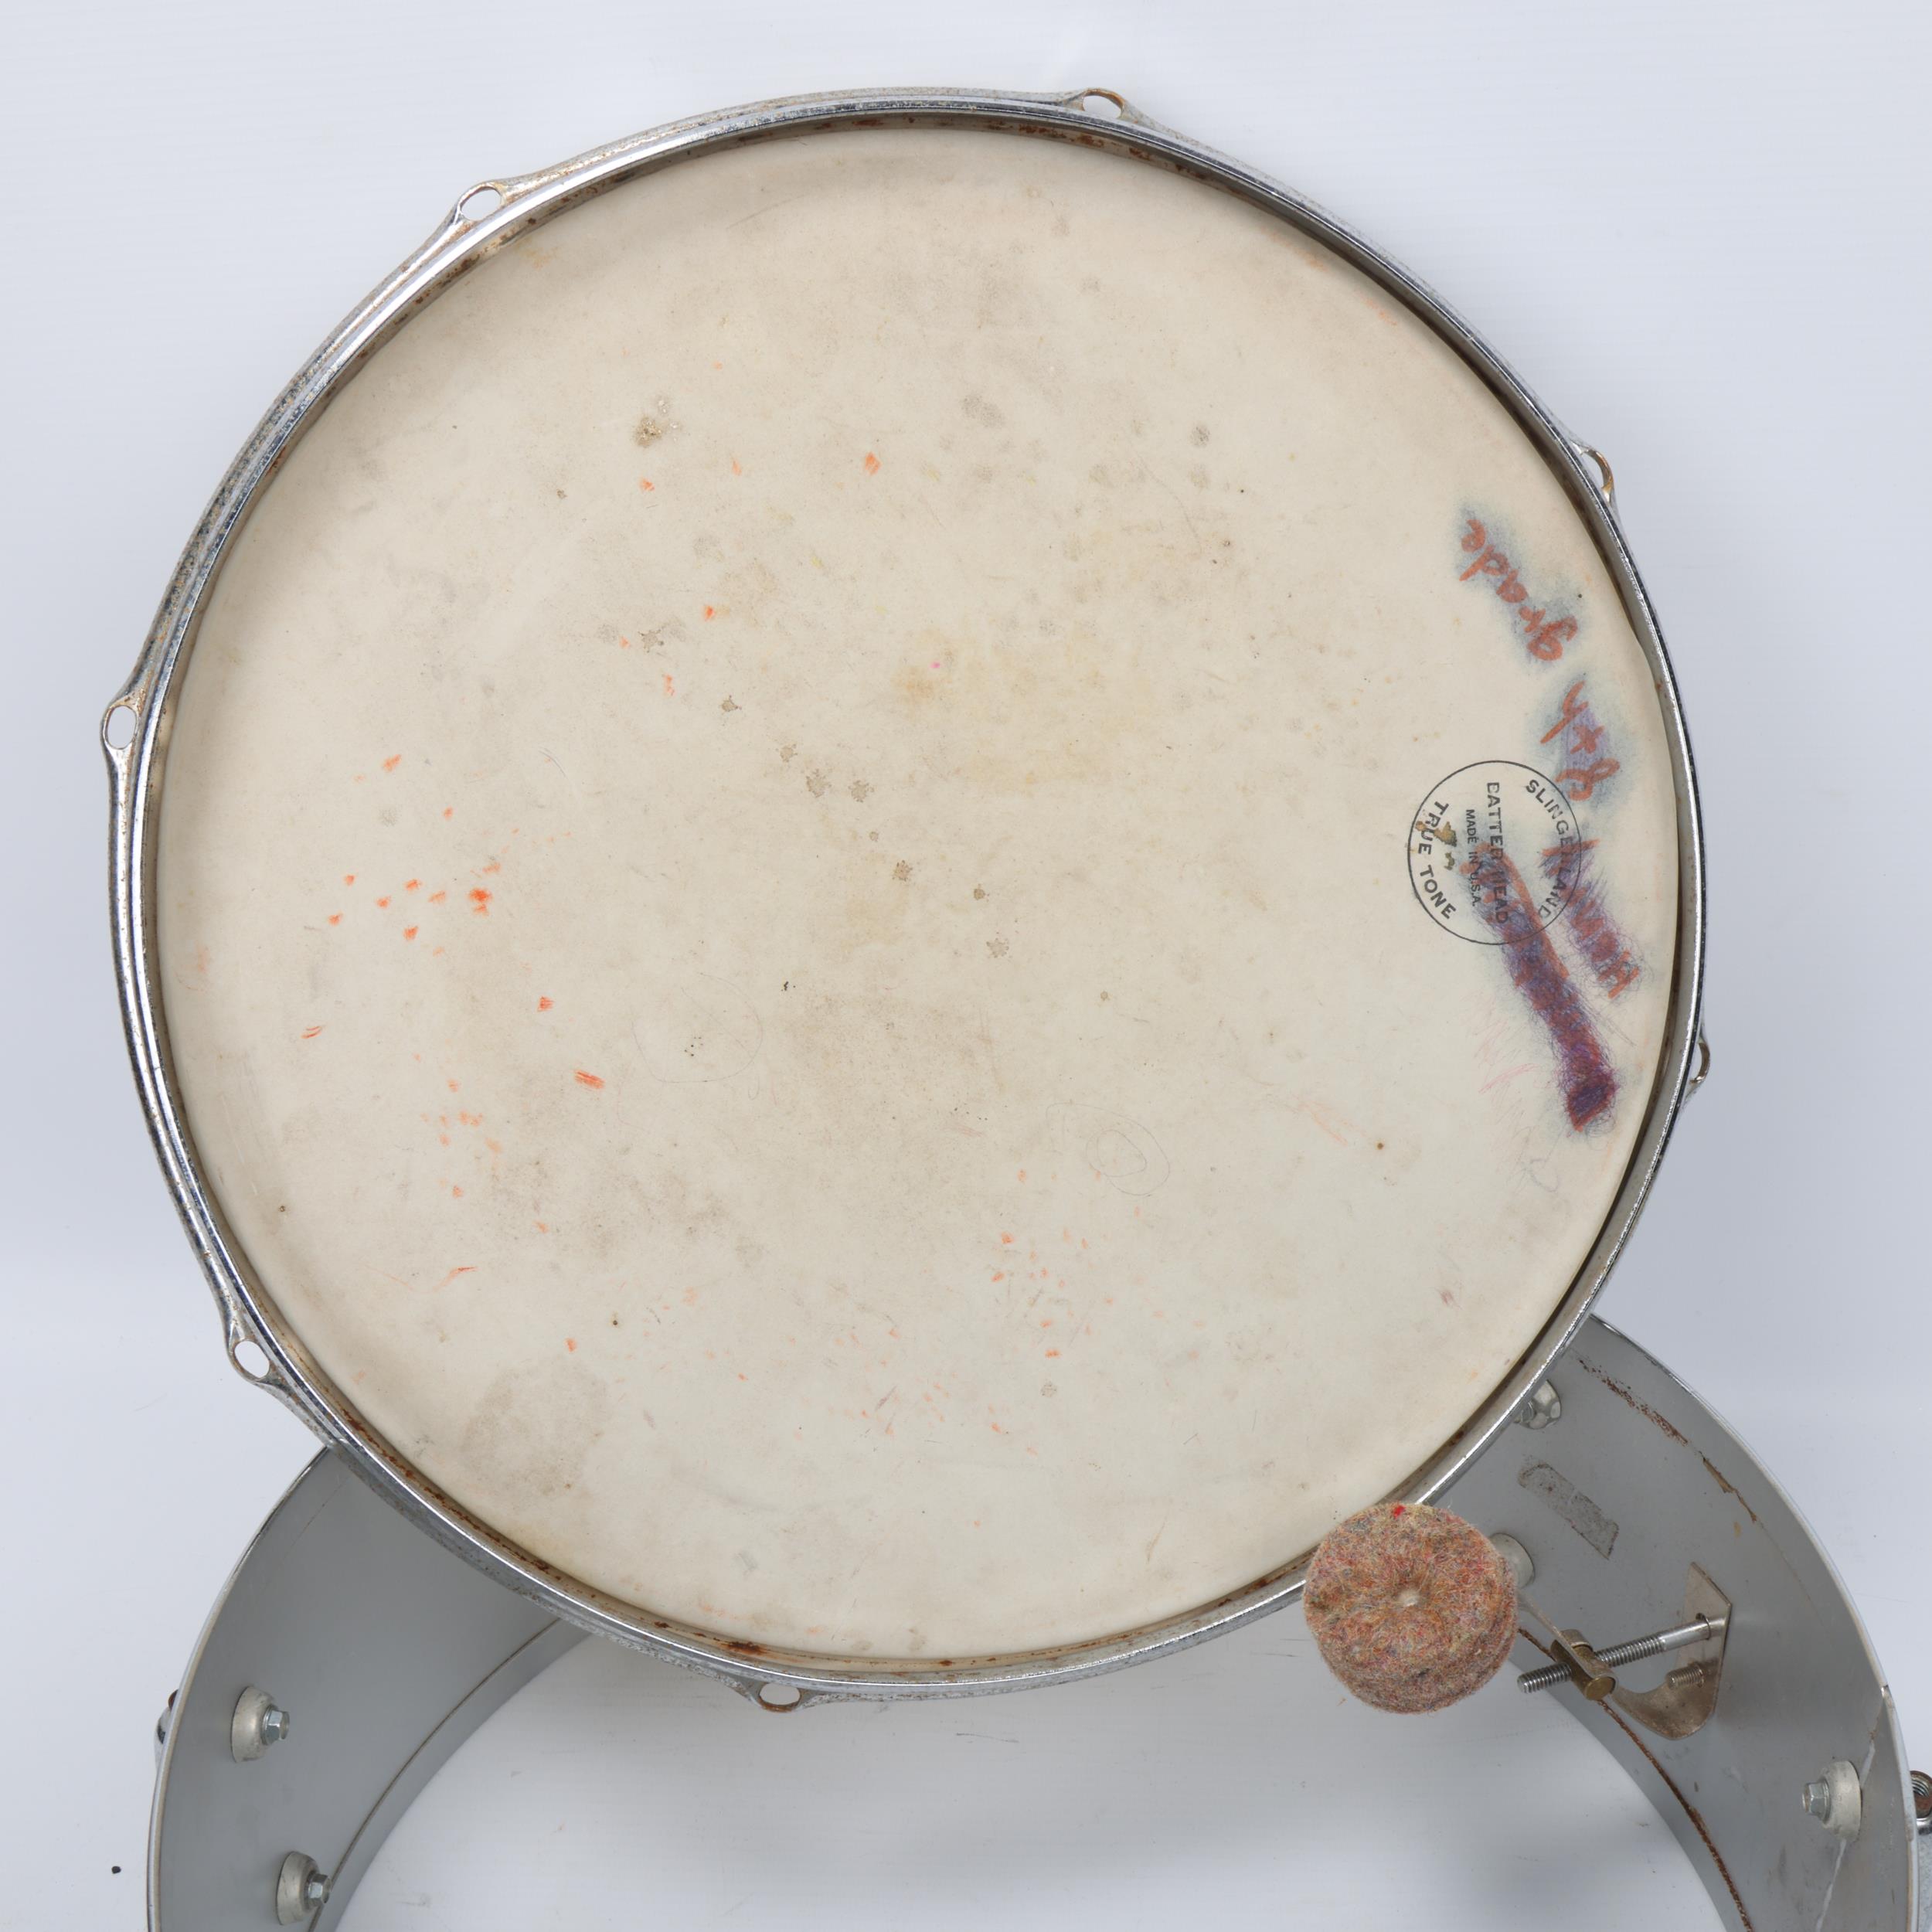 JIMI HENDRIX / MITCH MITCHELL INTEREST - A used 14inch Chrome Steel SLINGERLAND Drum Shell, - Image 2 of 3